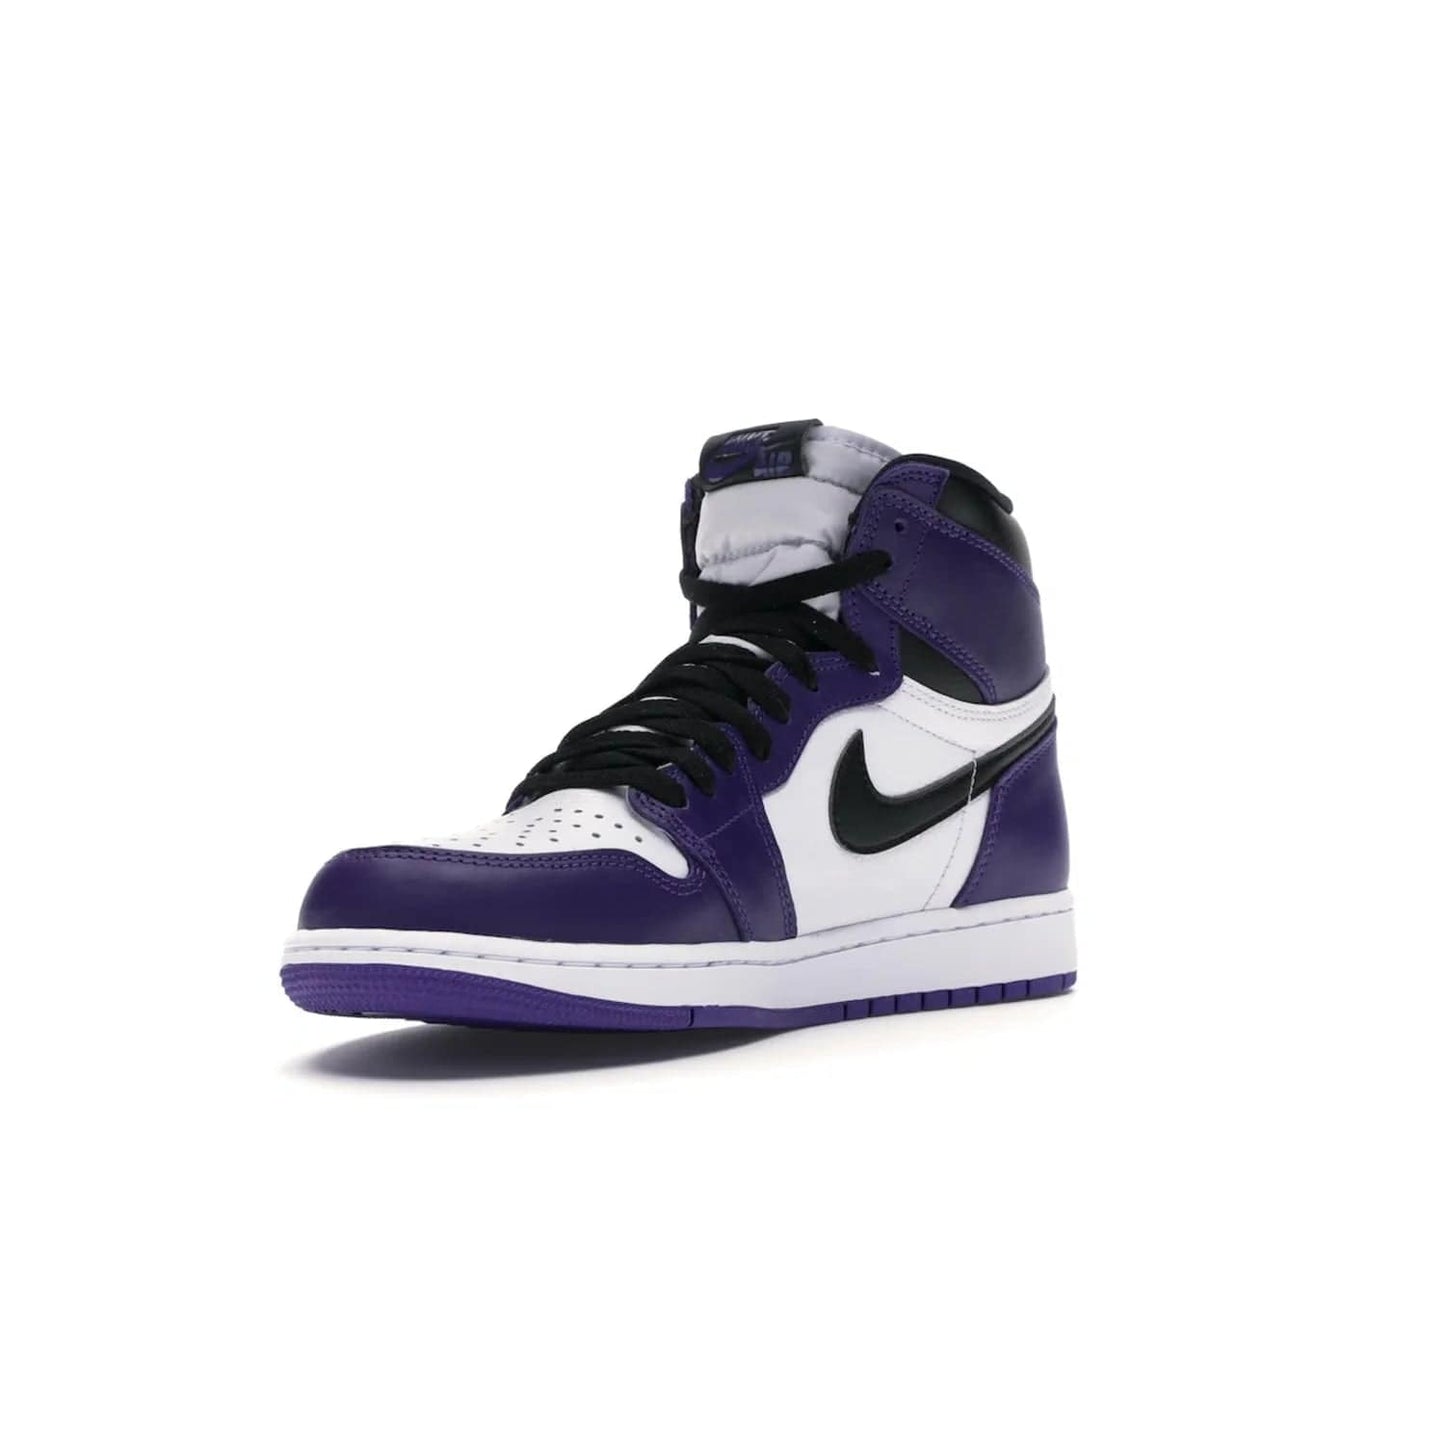 Jordan 1 Retro High Court Purple White - Image 14 - Only at www.BallersClubKickz.com - Grab the classic Jordan 1 Retro High Court Purple White and add major flavor to your collection. White leather upper with Court Purple overlays and Swoosh logo. White midsole and purple outsole. Get yours and rep your Jordan Brand.